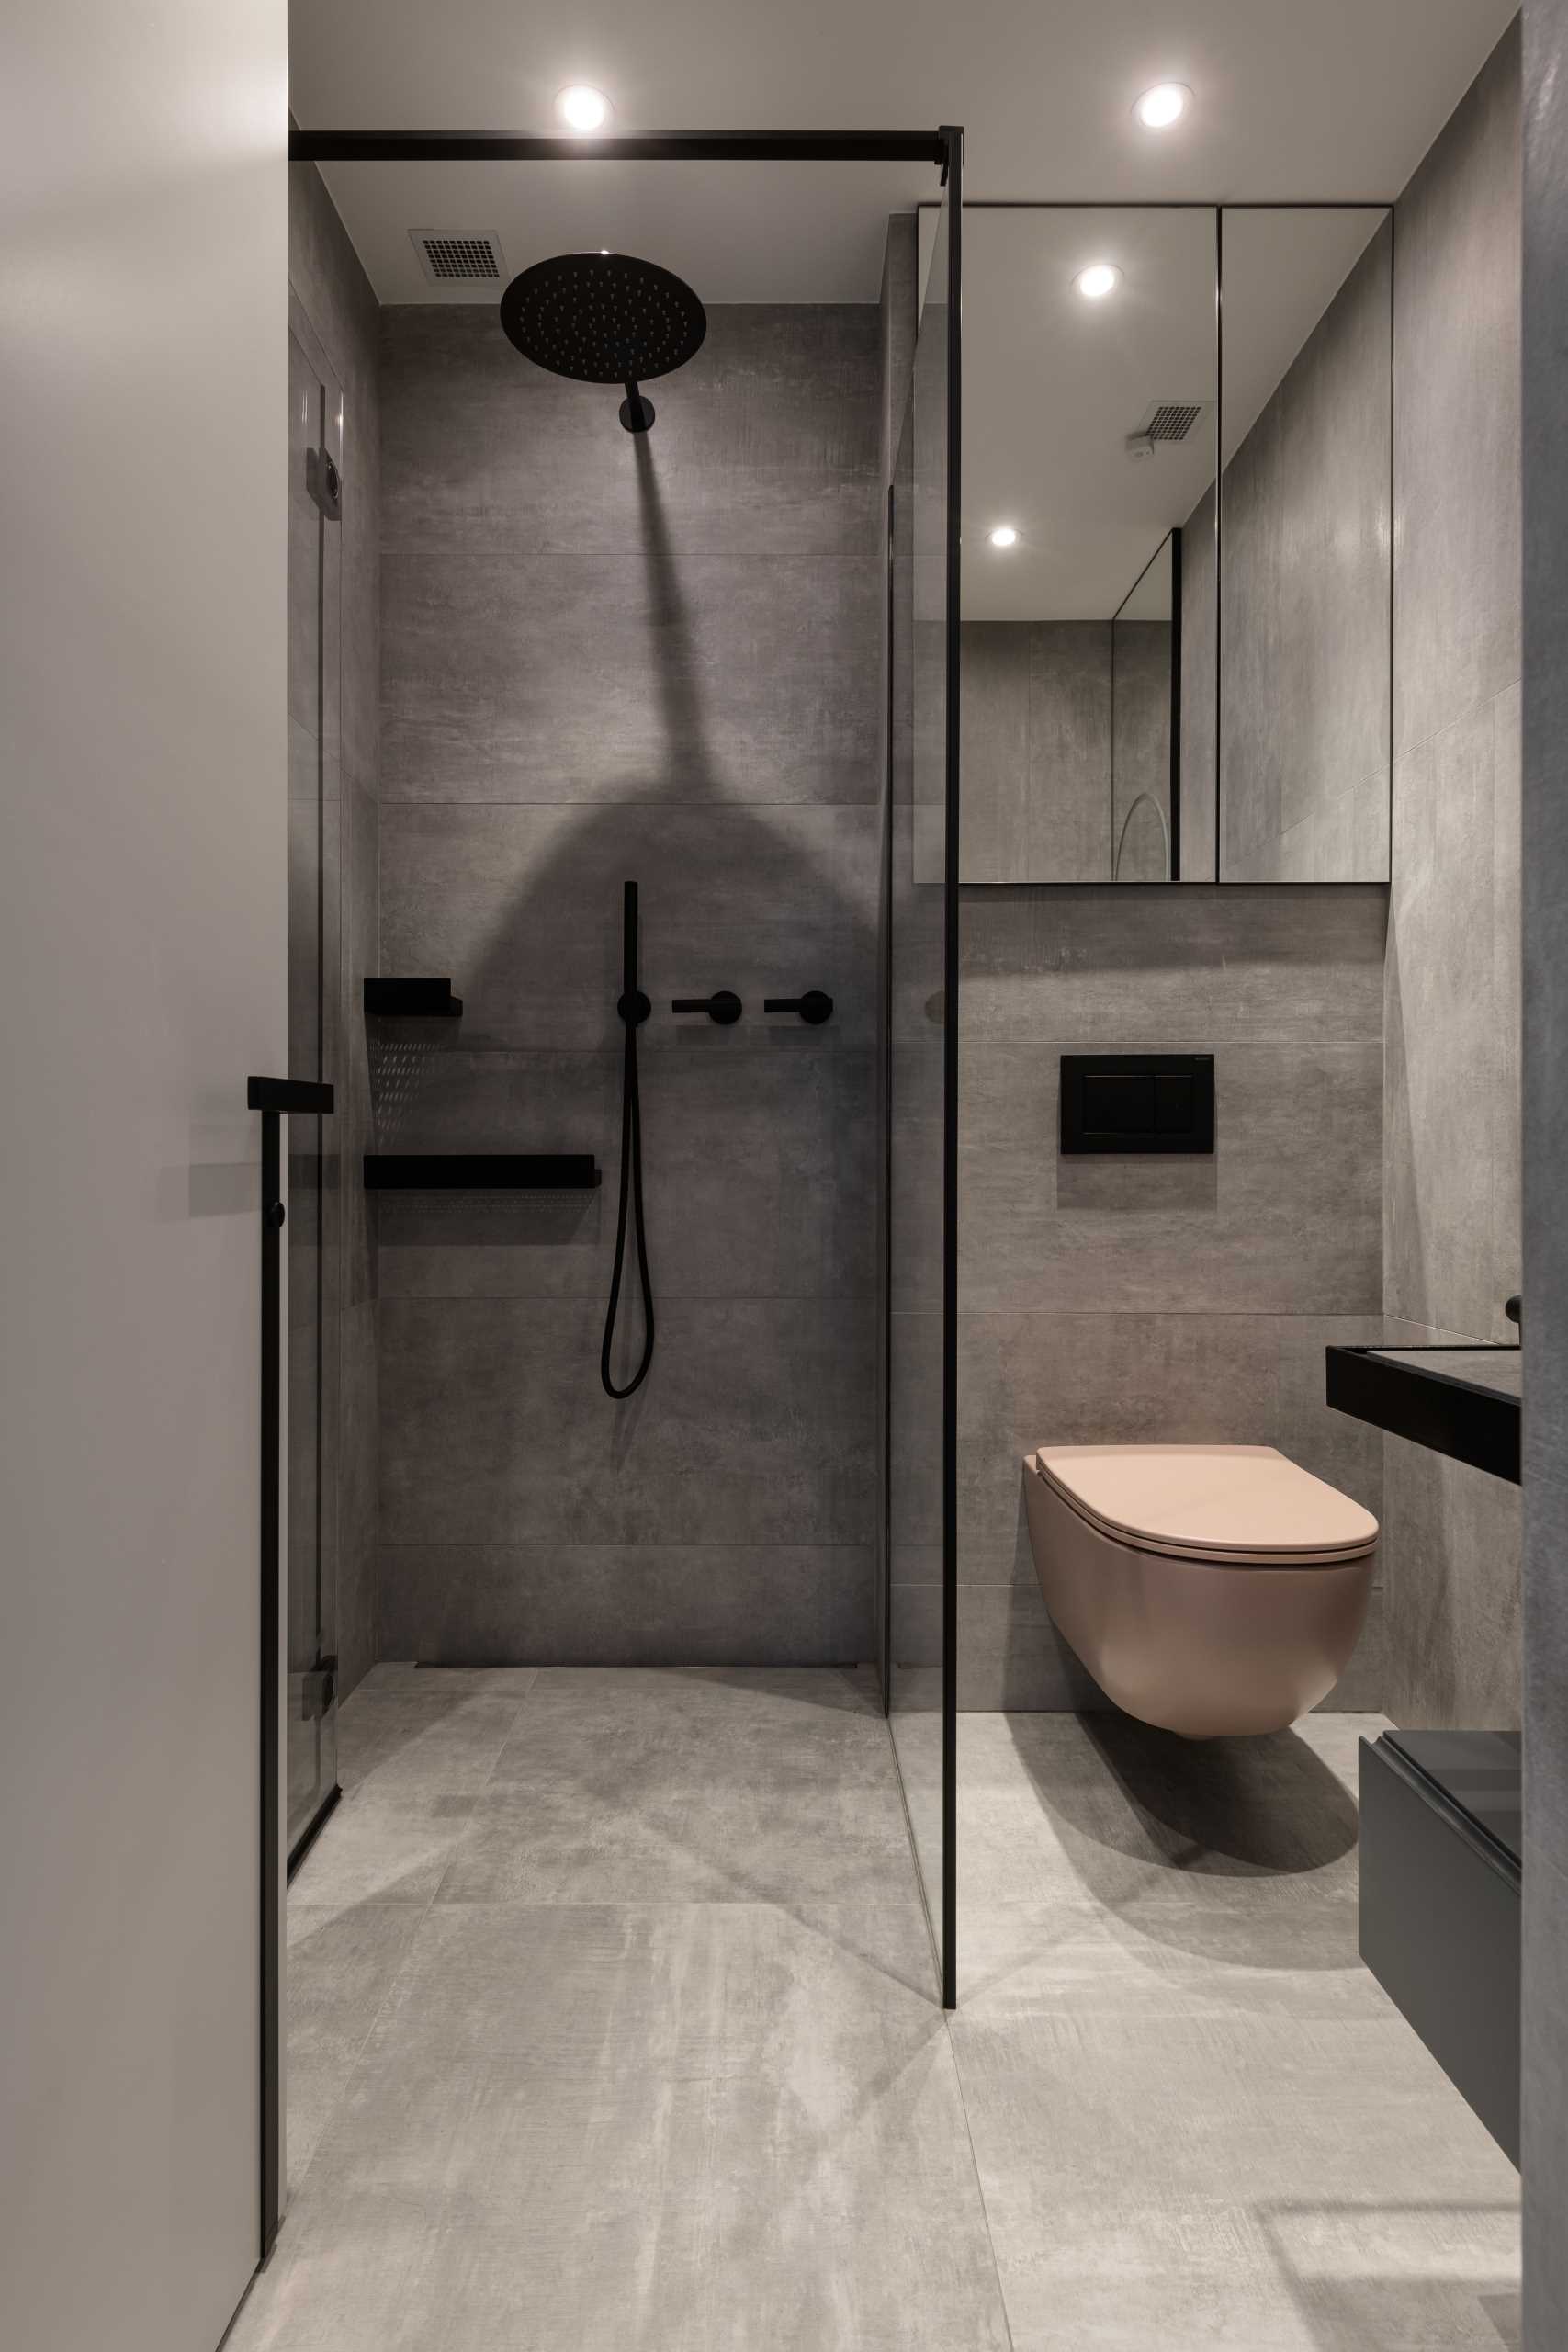 A modern bathroom with black accents.